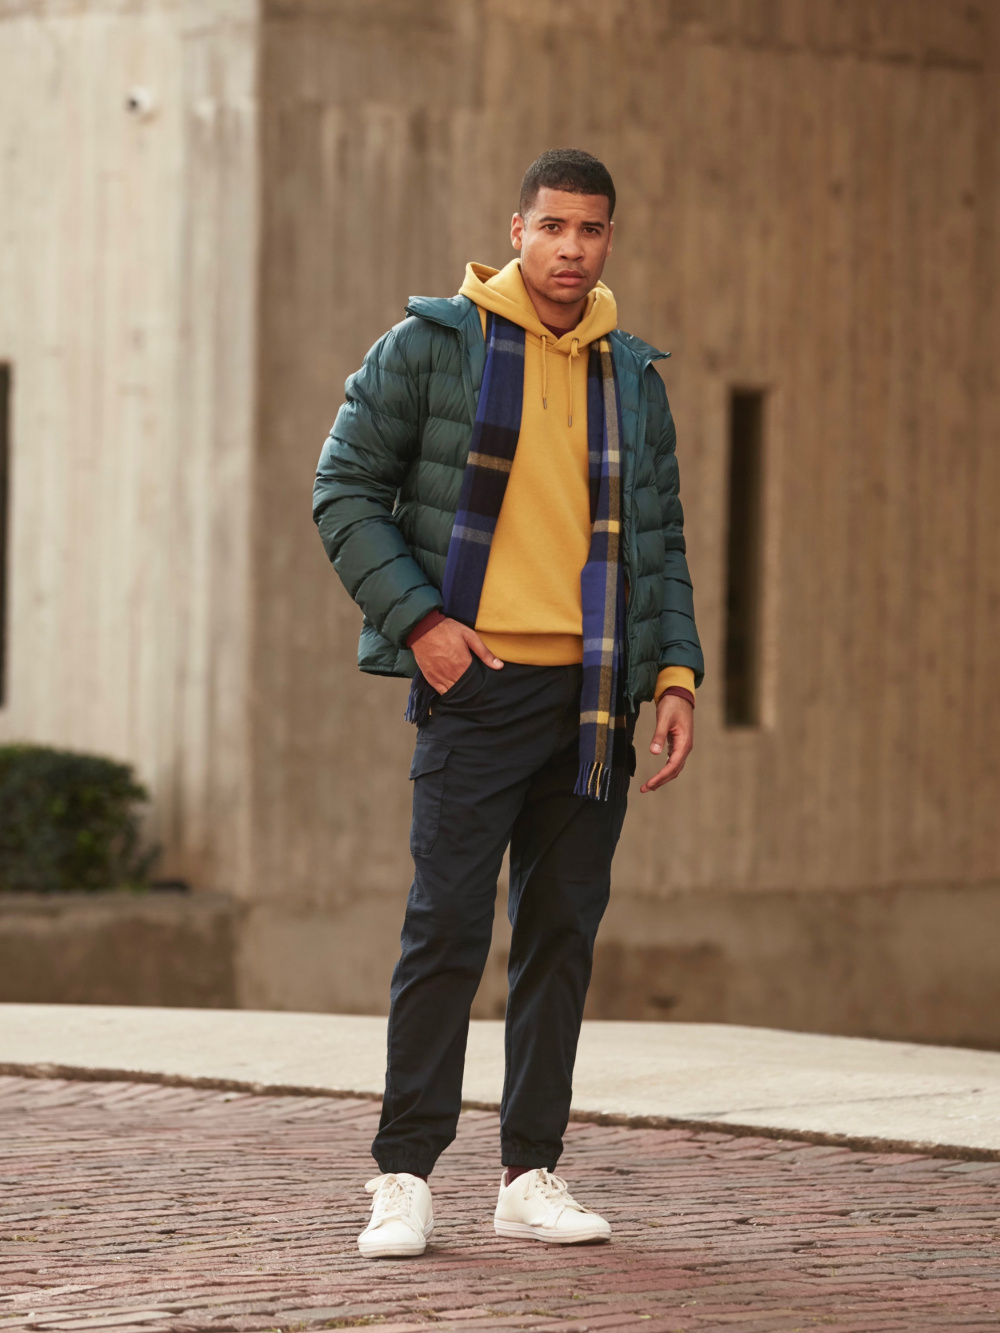 Navy Dress Pants with Navy Puffer Jacket Outfits For Men (2 ideas &  outfits)